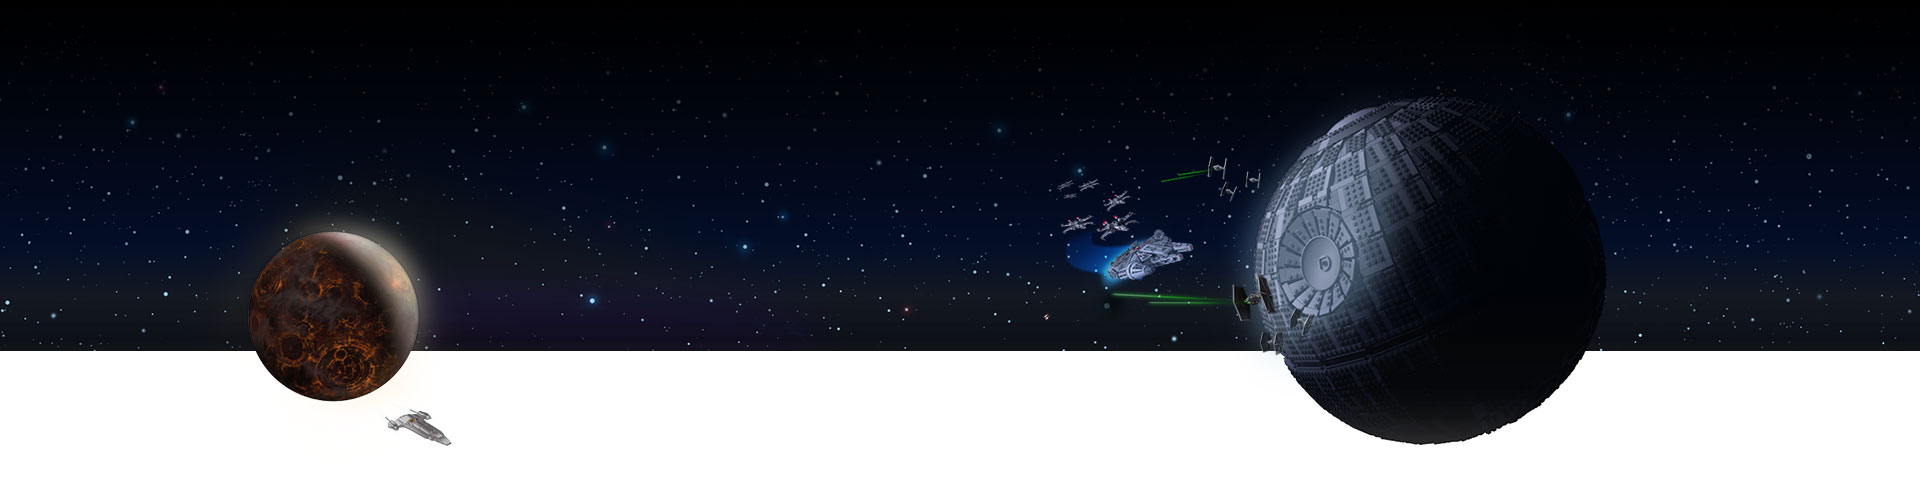 Two enemy bases in space with stars in the background.